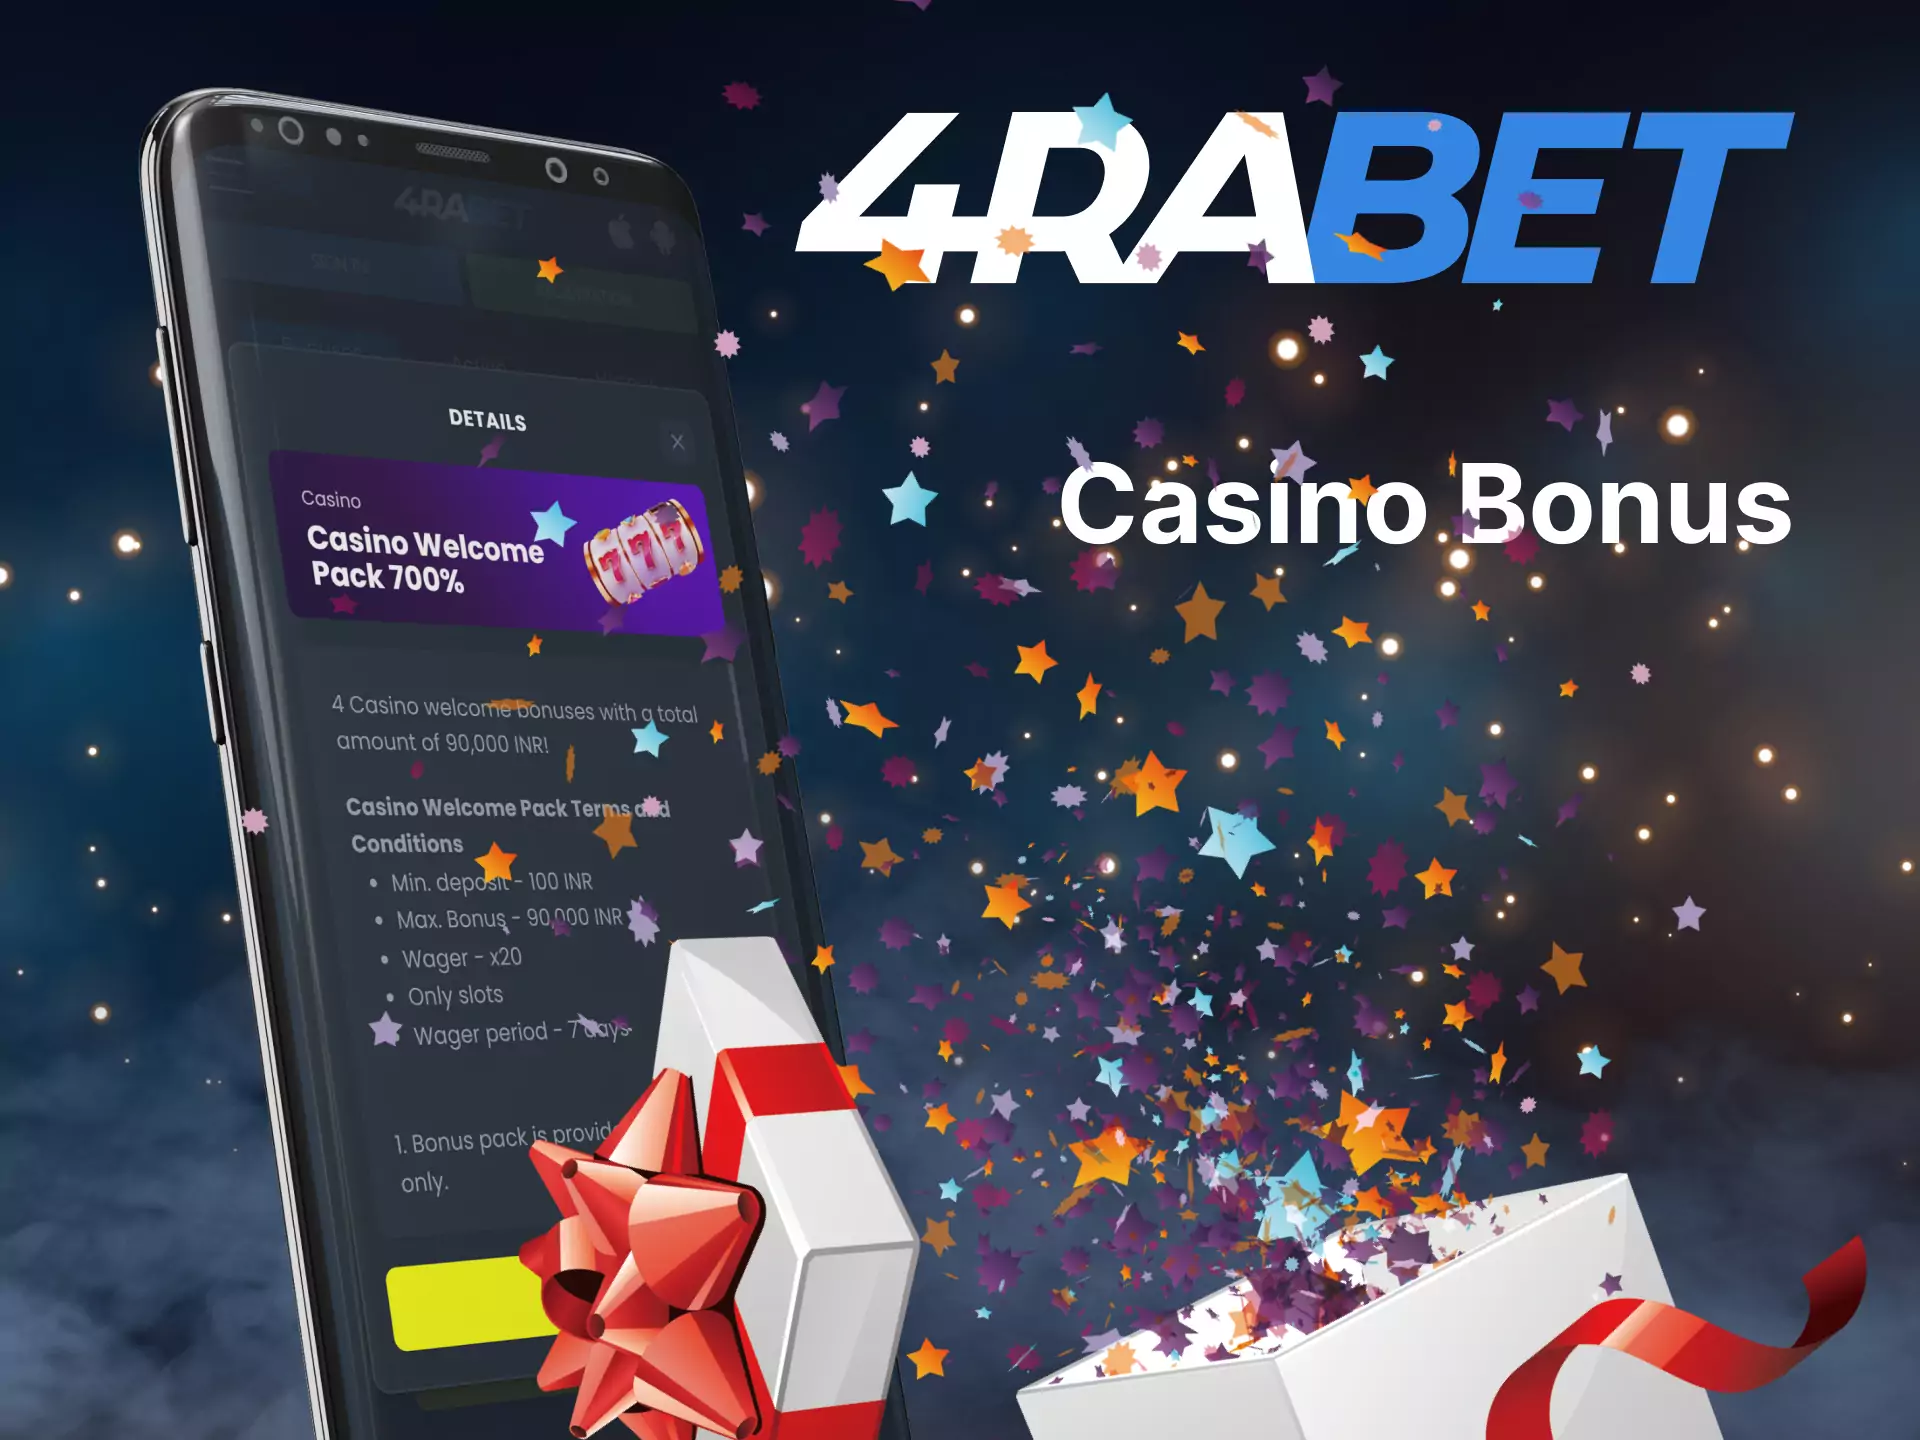 Sign up for the 4rabet mobile app and get a special casino bonus.